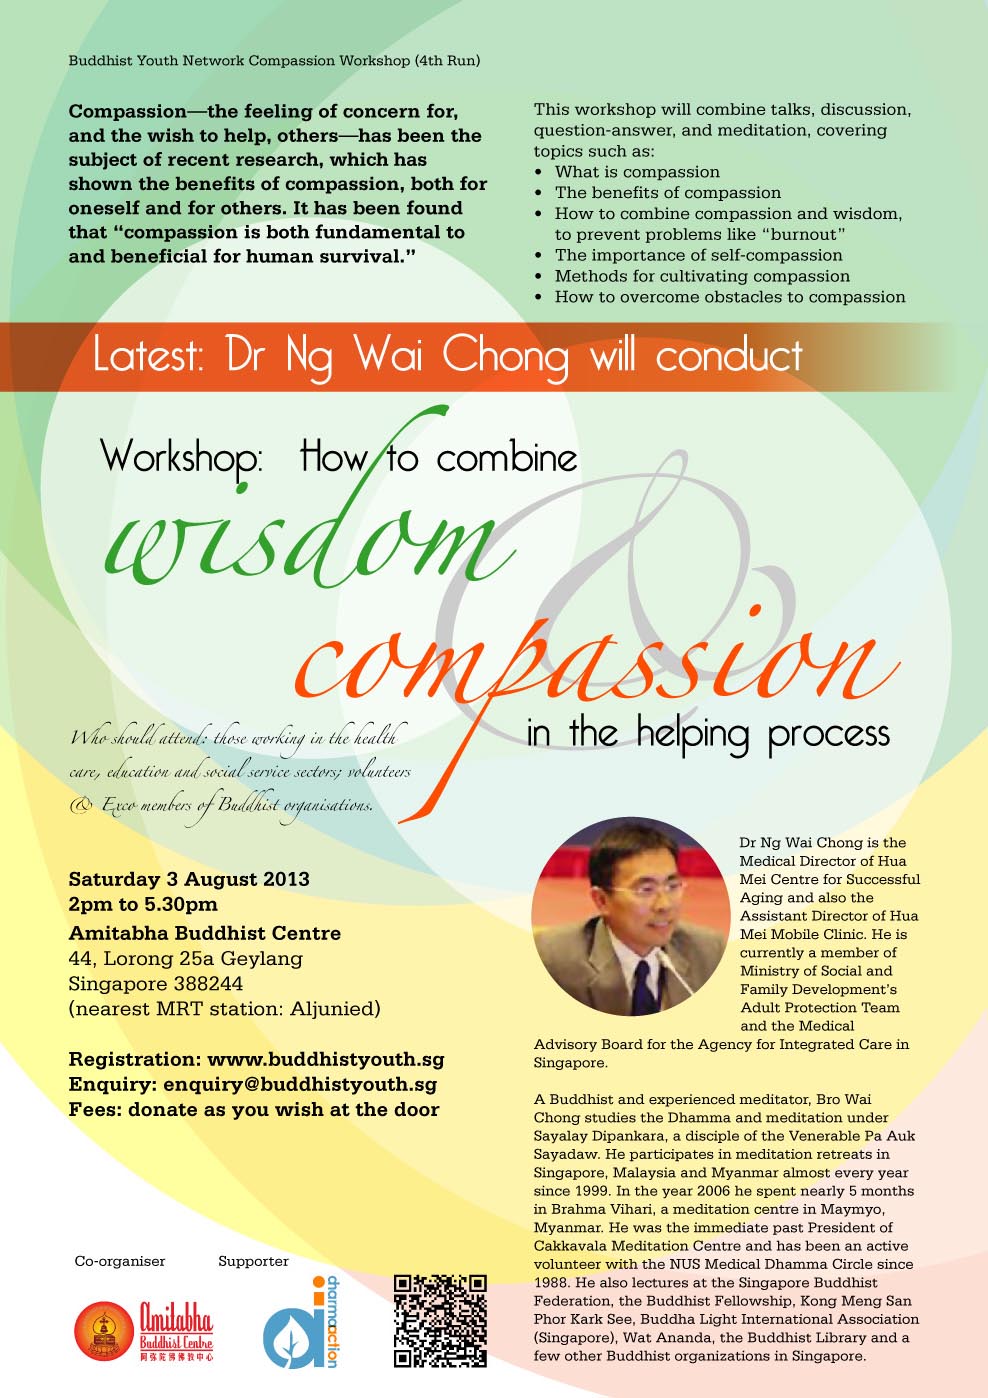 3 Aug: Compassion Workshop now conducted by Dr Ng Wai Chong